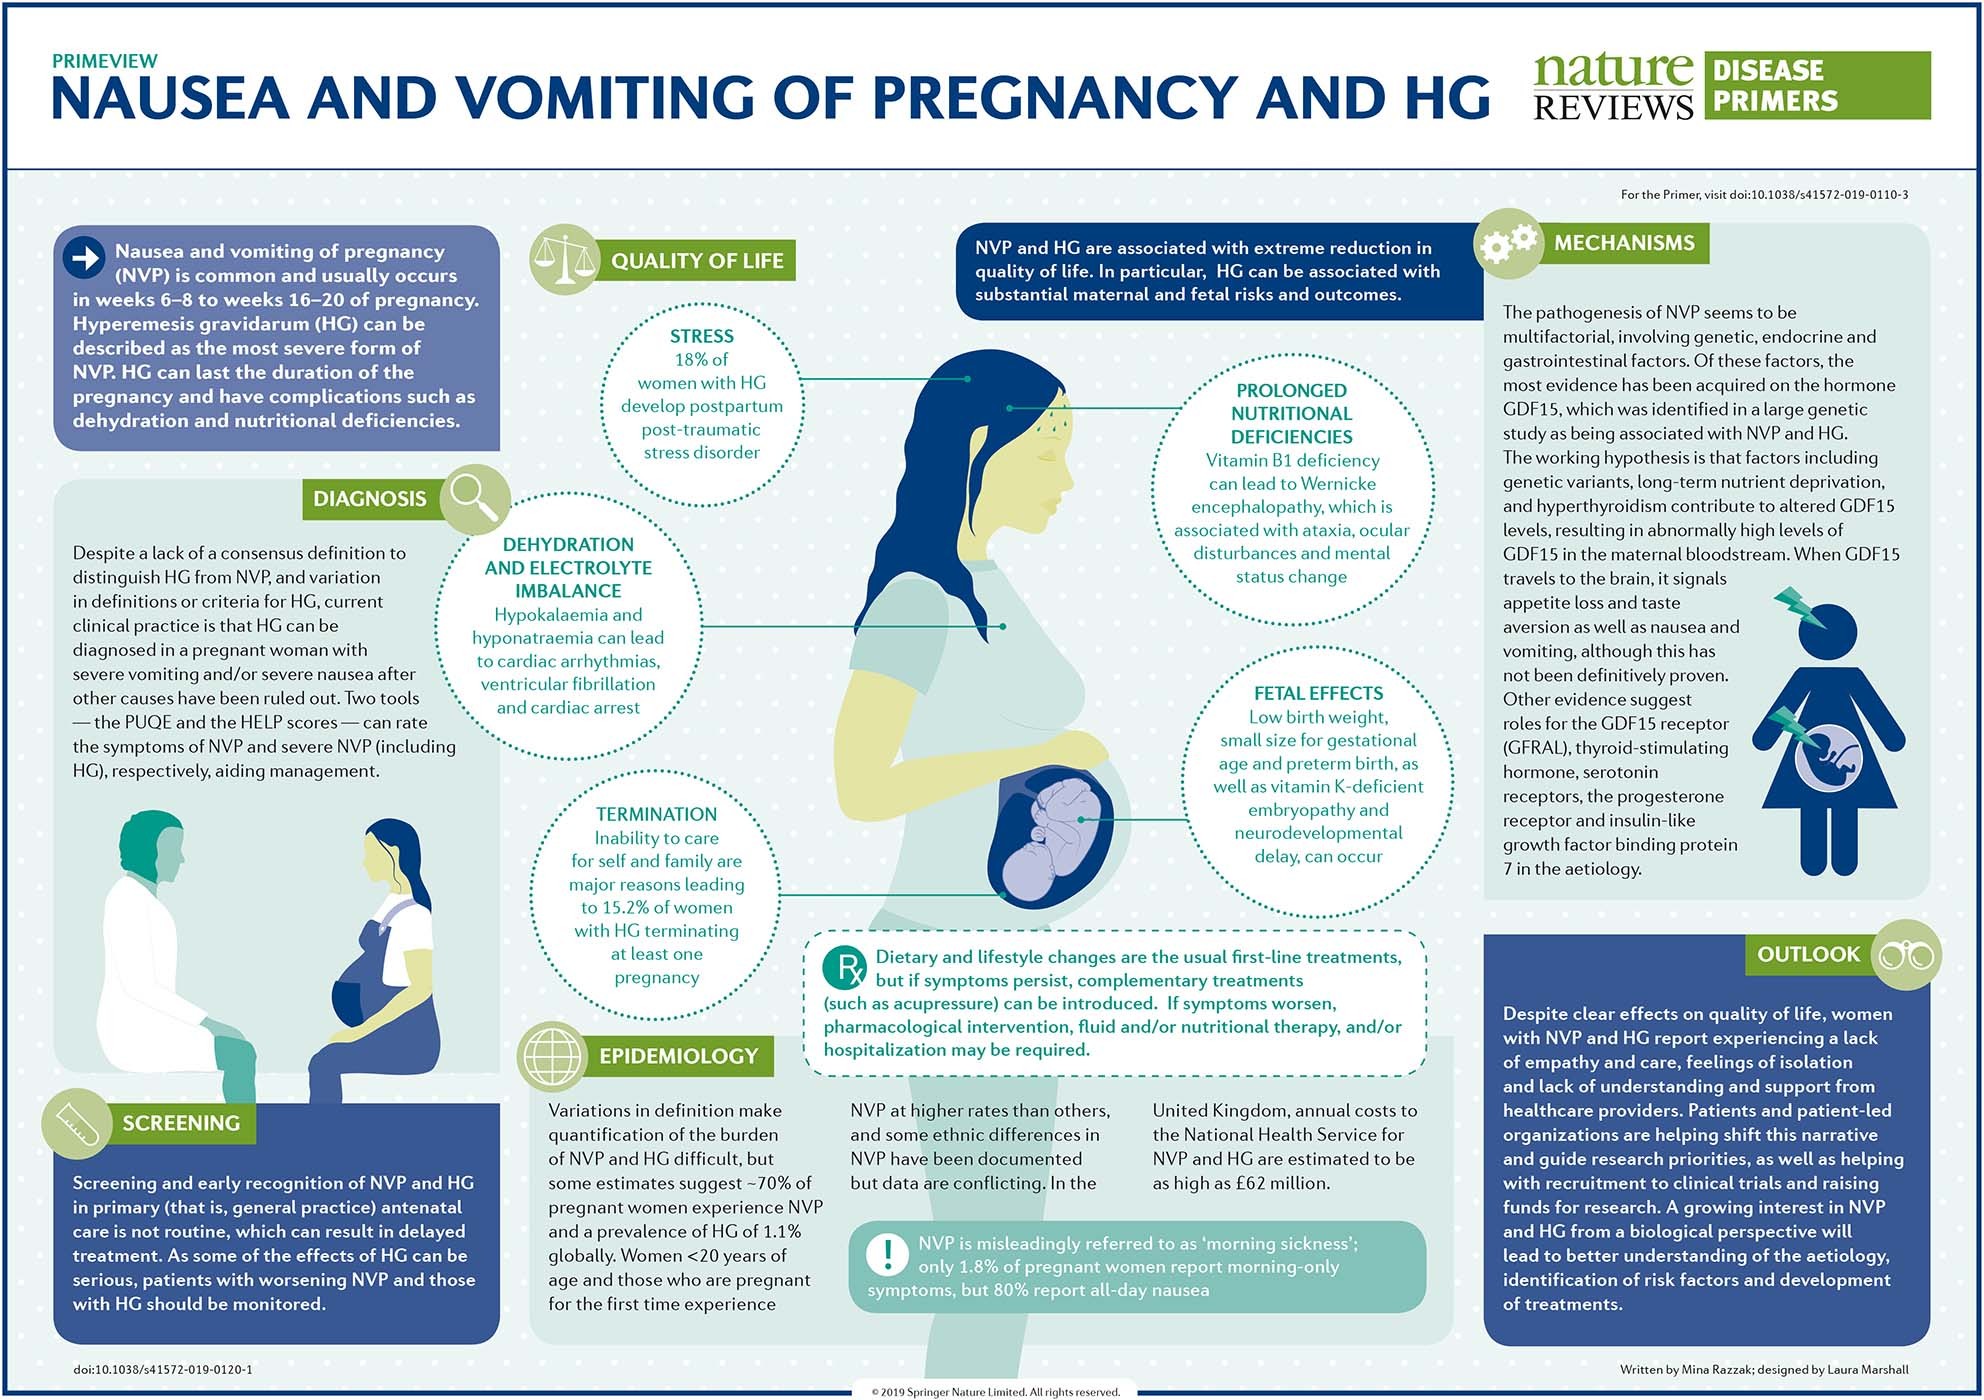 Nausea and vomiting of pregnancy and HG | Nature Reviews Disease Primers